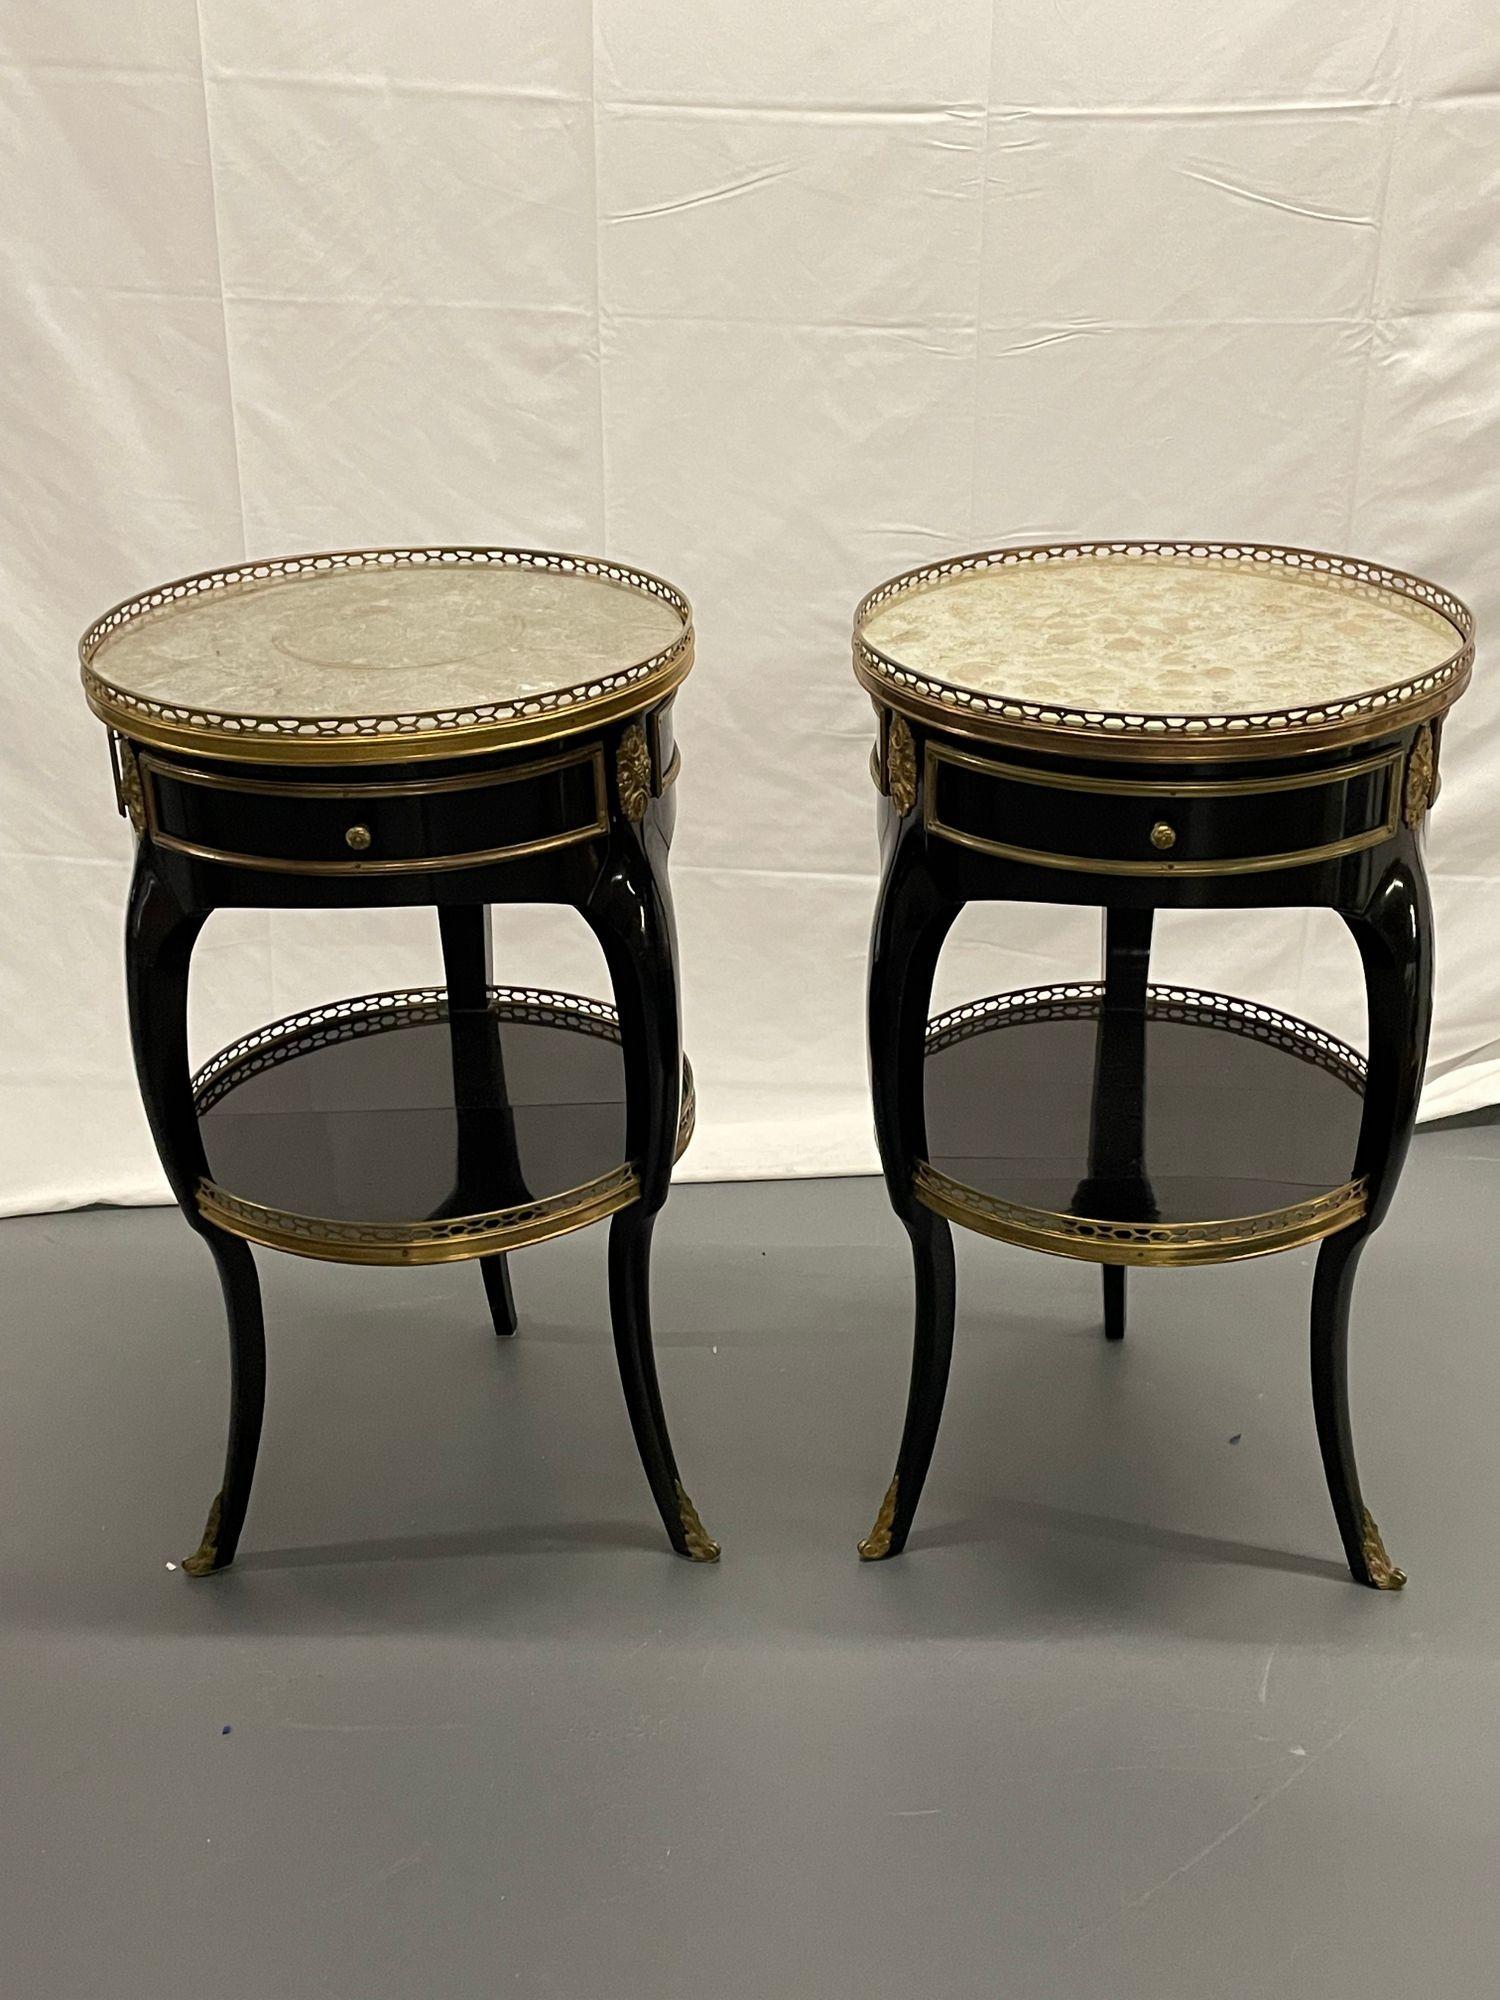 Pair of Maison Jansen Hollywood Regency style Gueridon, end / side tables, silver leaf glass tops. 
 
This stunning pair having silver gilt glass tops, mounted around pierced bronze galleried frames, supported by ebony bronze, mounted table bases